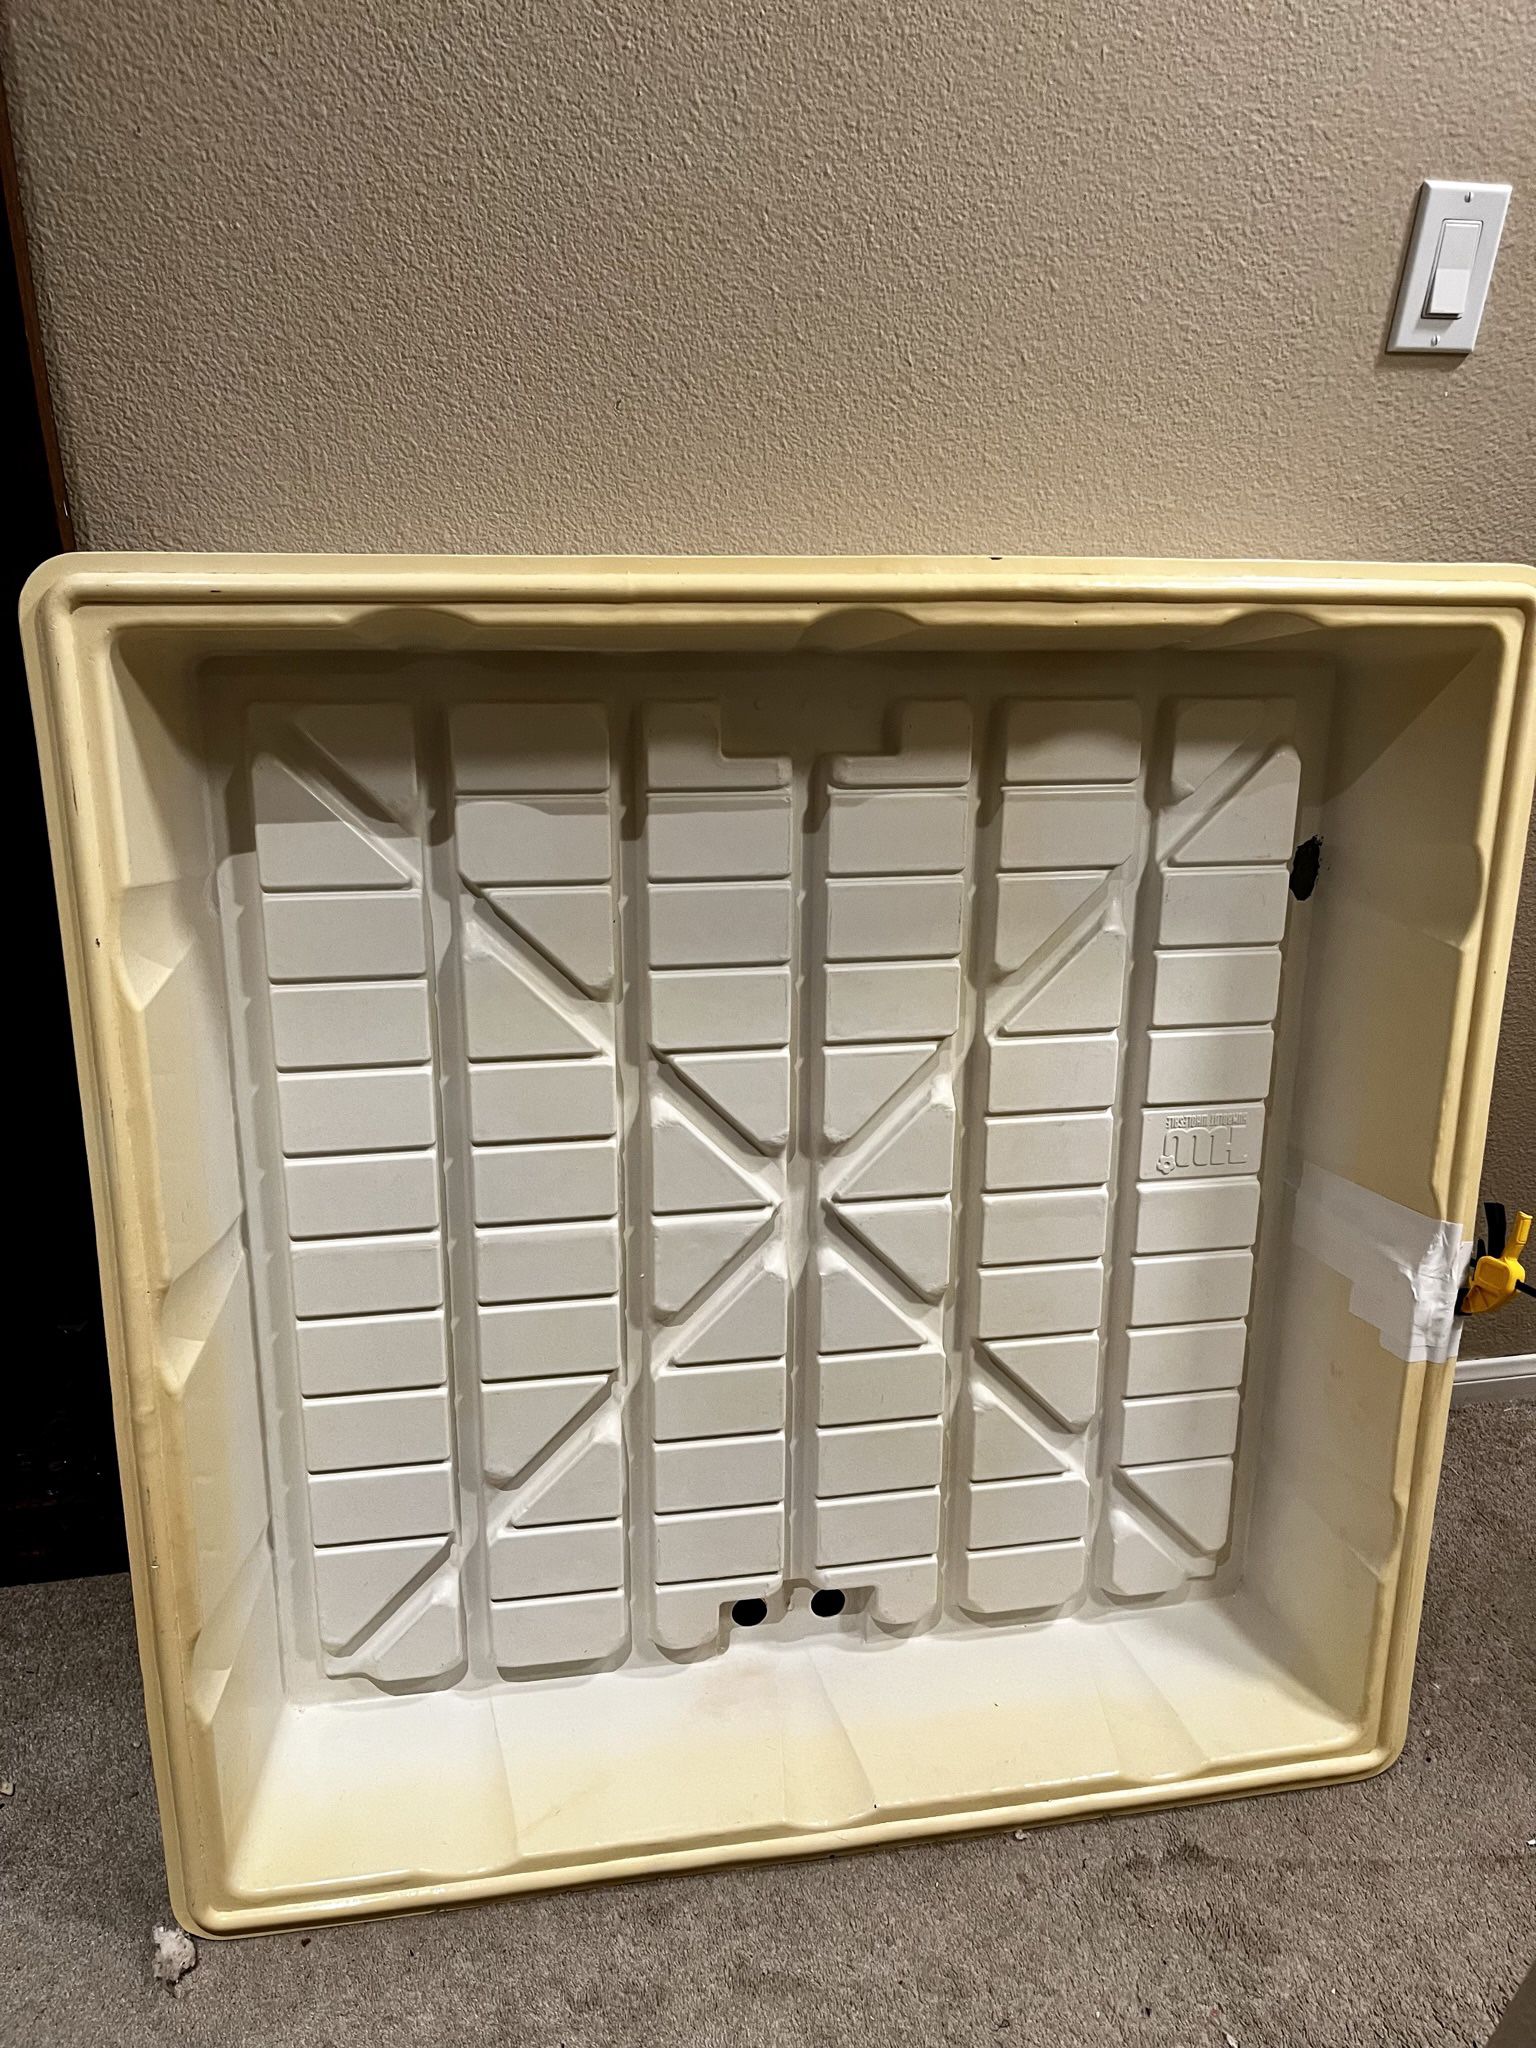 FREE Hydroponic Grow Table / Tray